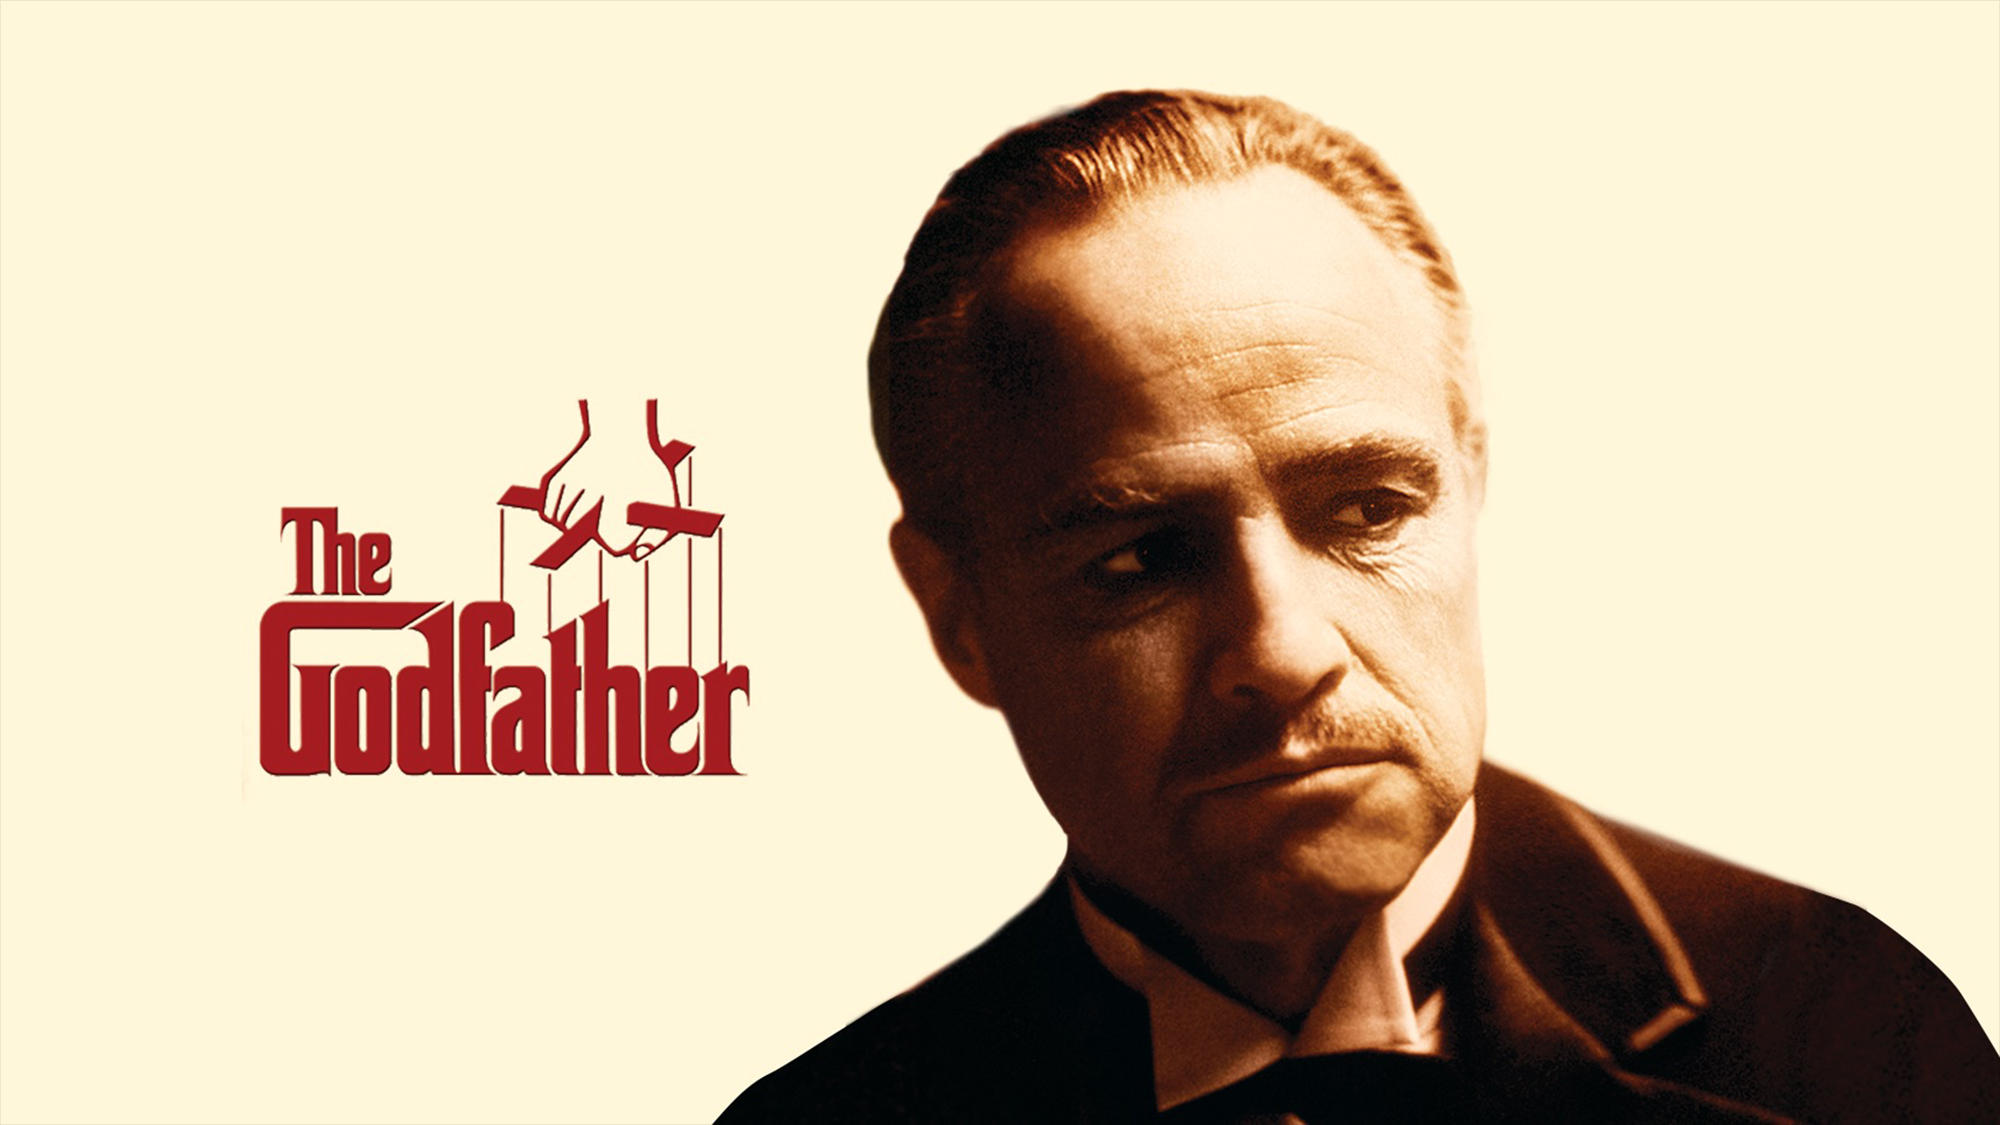 The godfather pc background - makeless